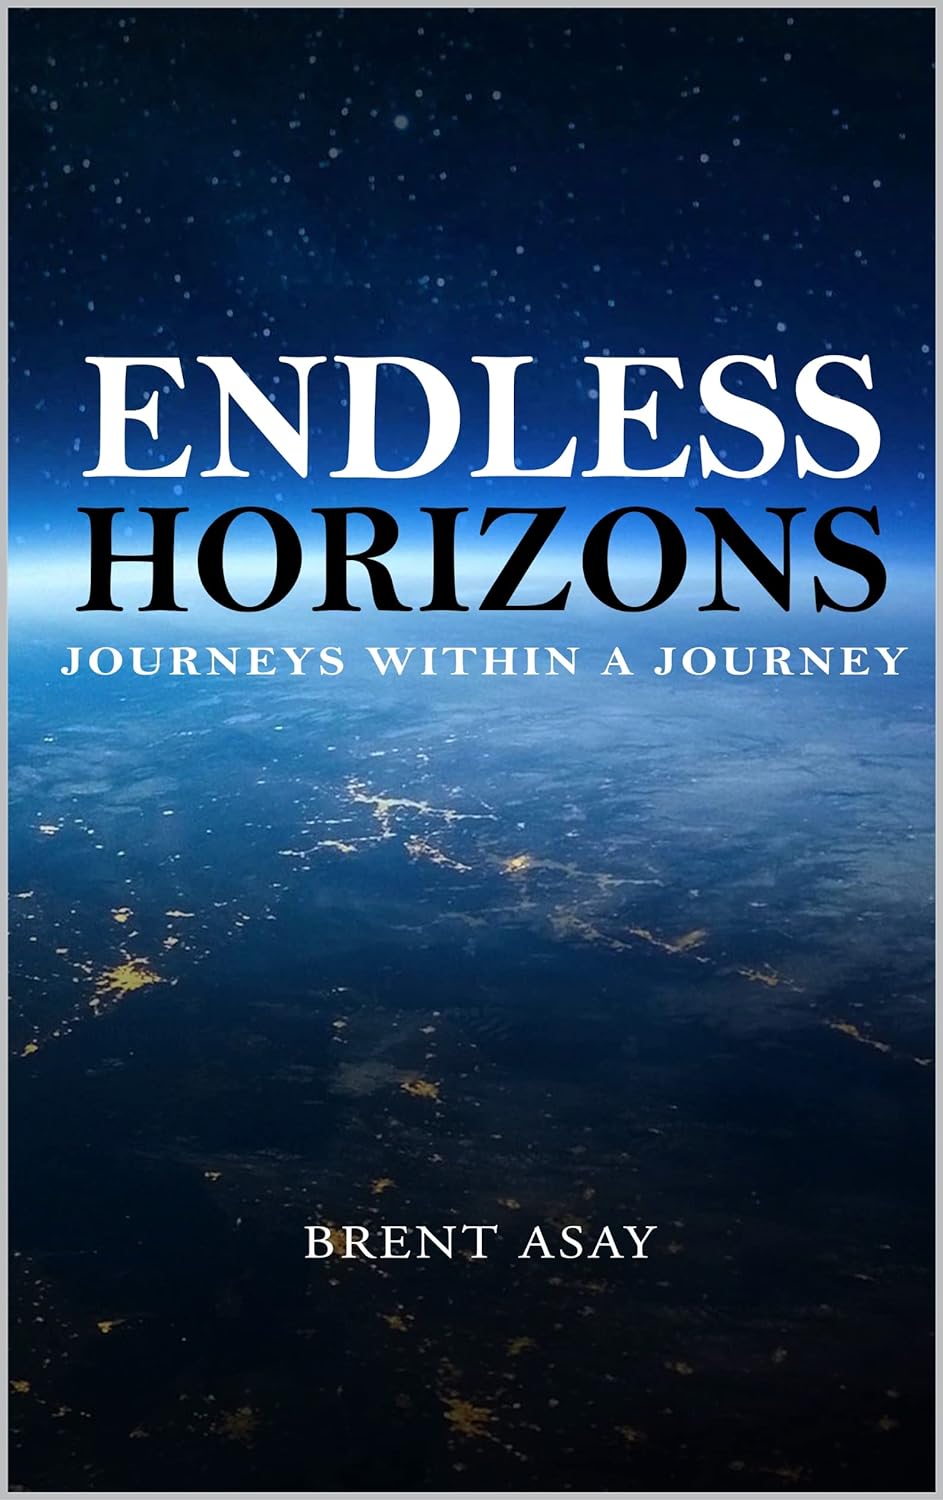 Discover the Poetry Universe of "Endless Horizons: Journeys Within A Journey" by Brent Asay